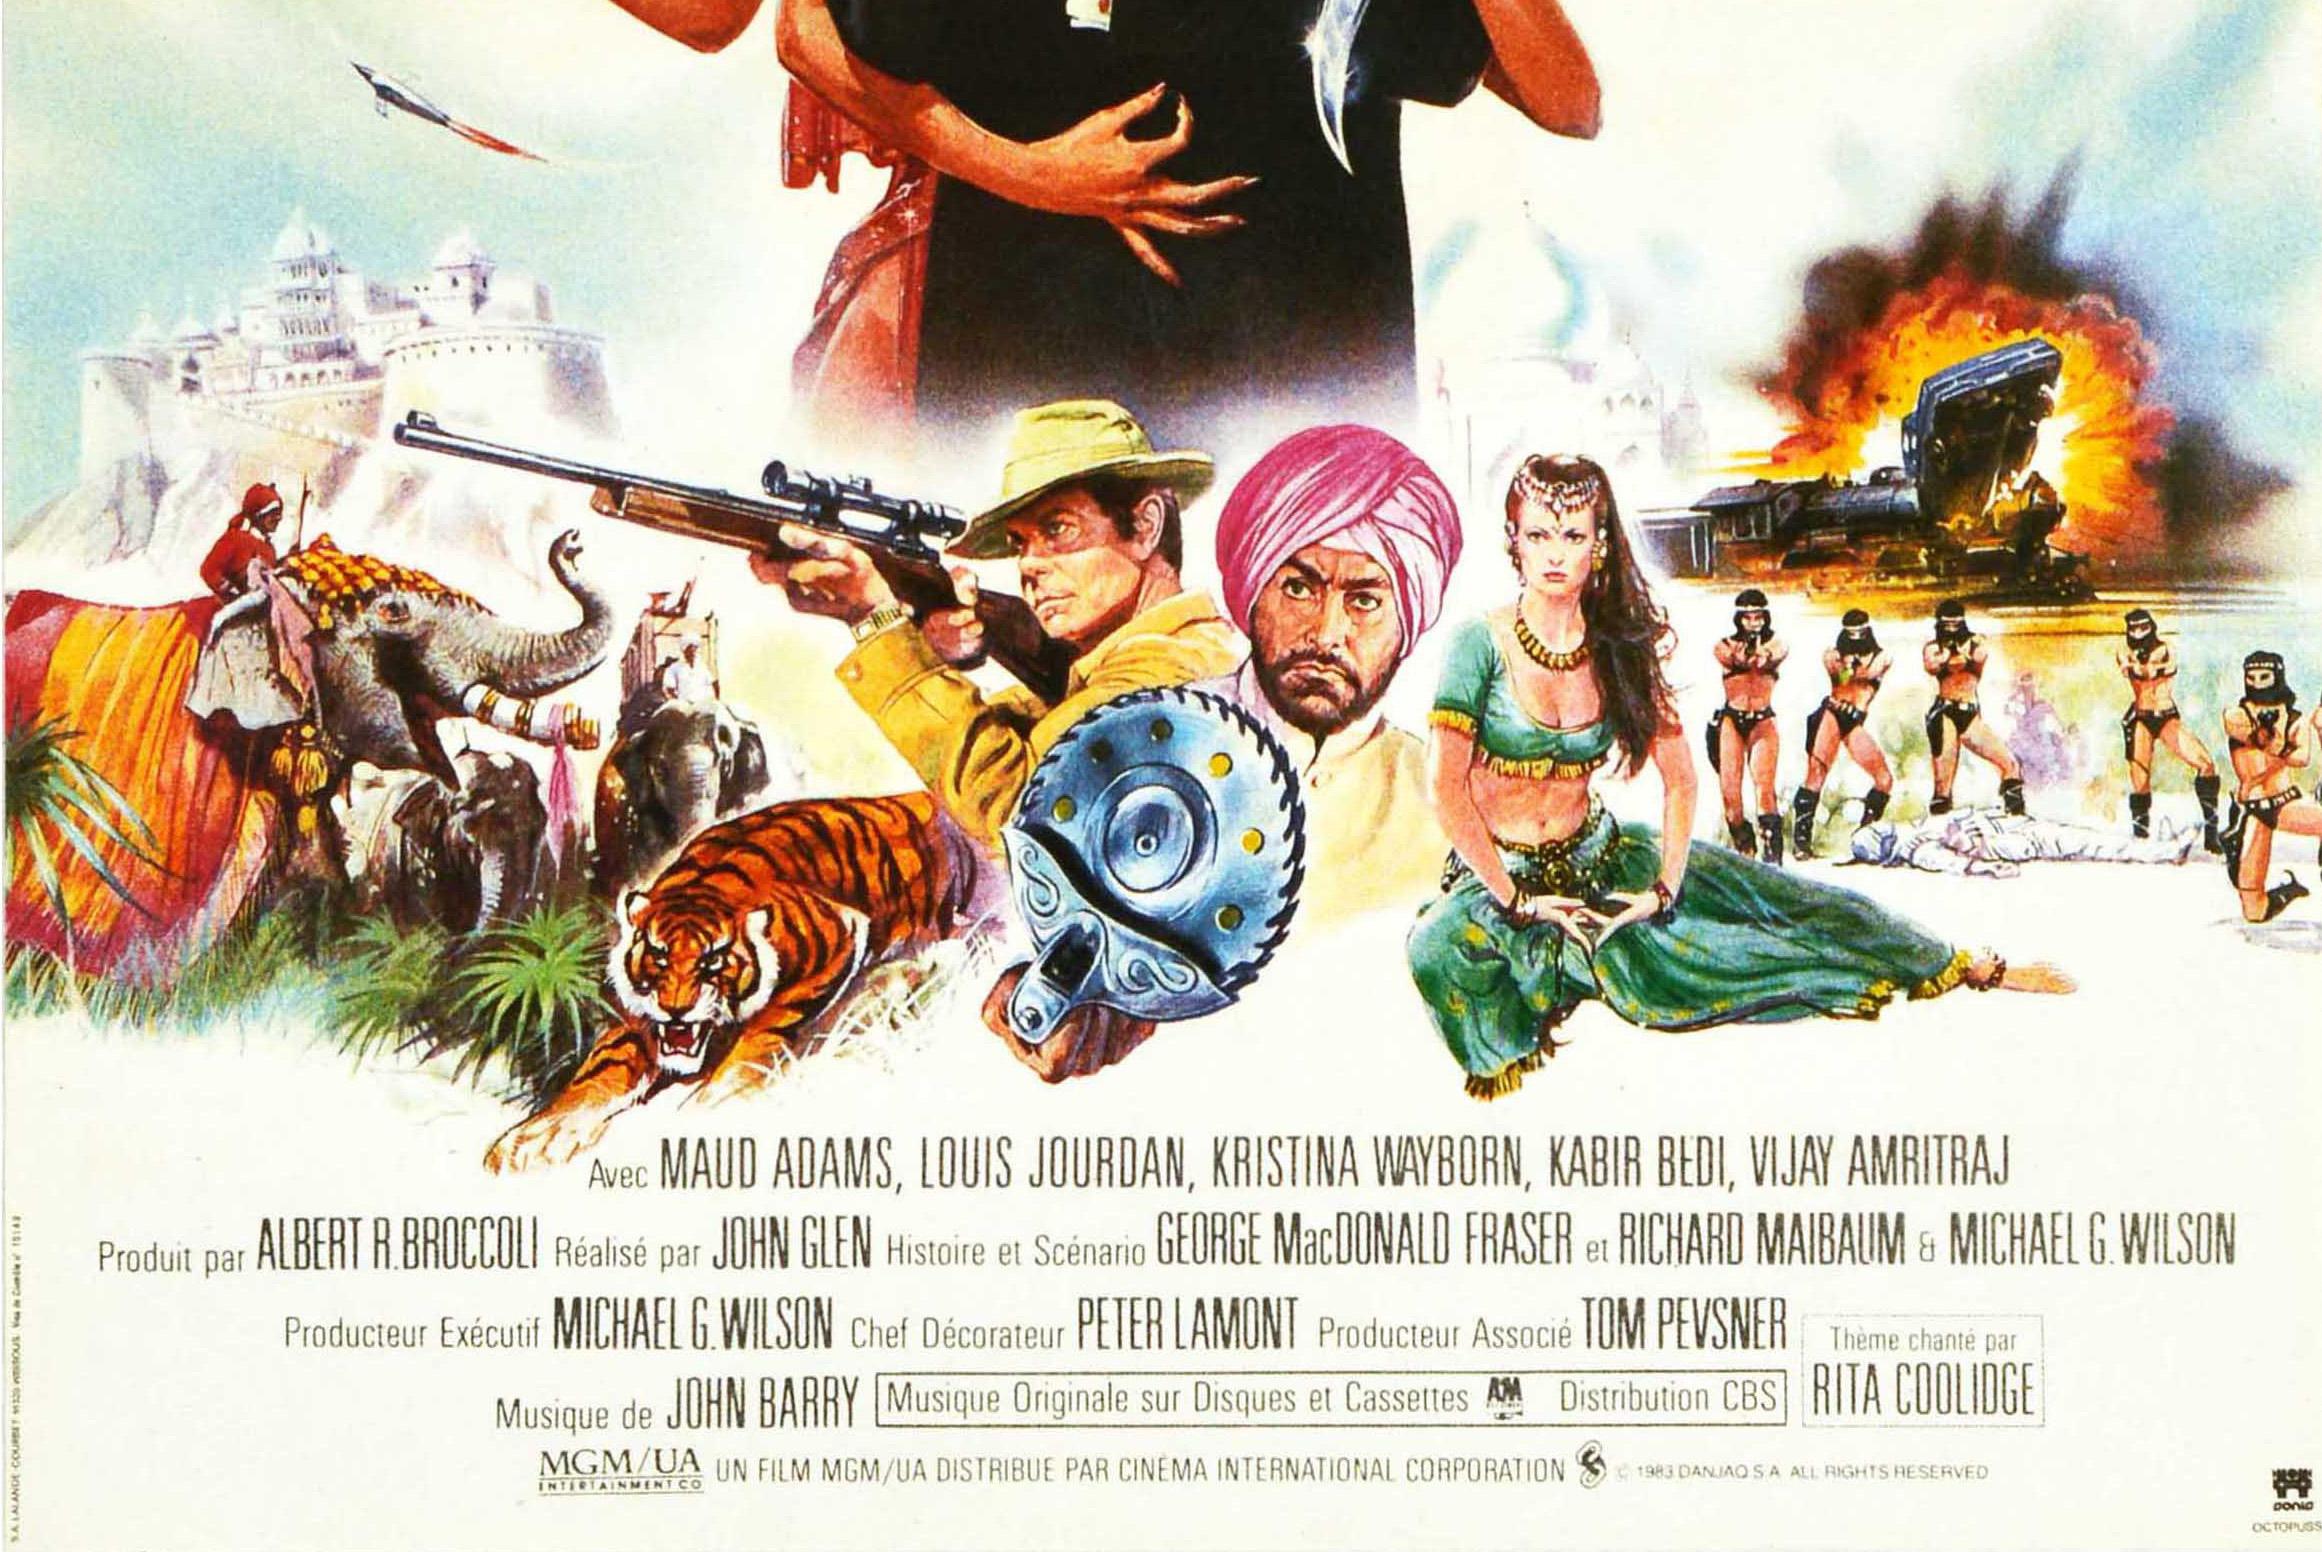 Original vintage movie poster for the French release of the James Bond 007 film Octopussy - Le Meilleur de Bond! / The Best of Bond! - directed by John Glen and starring Roger Moore in the lead role with Maud Adams, Louis Jourdan, Kristina Wayborn